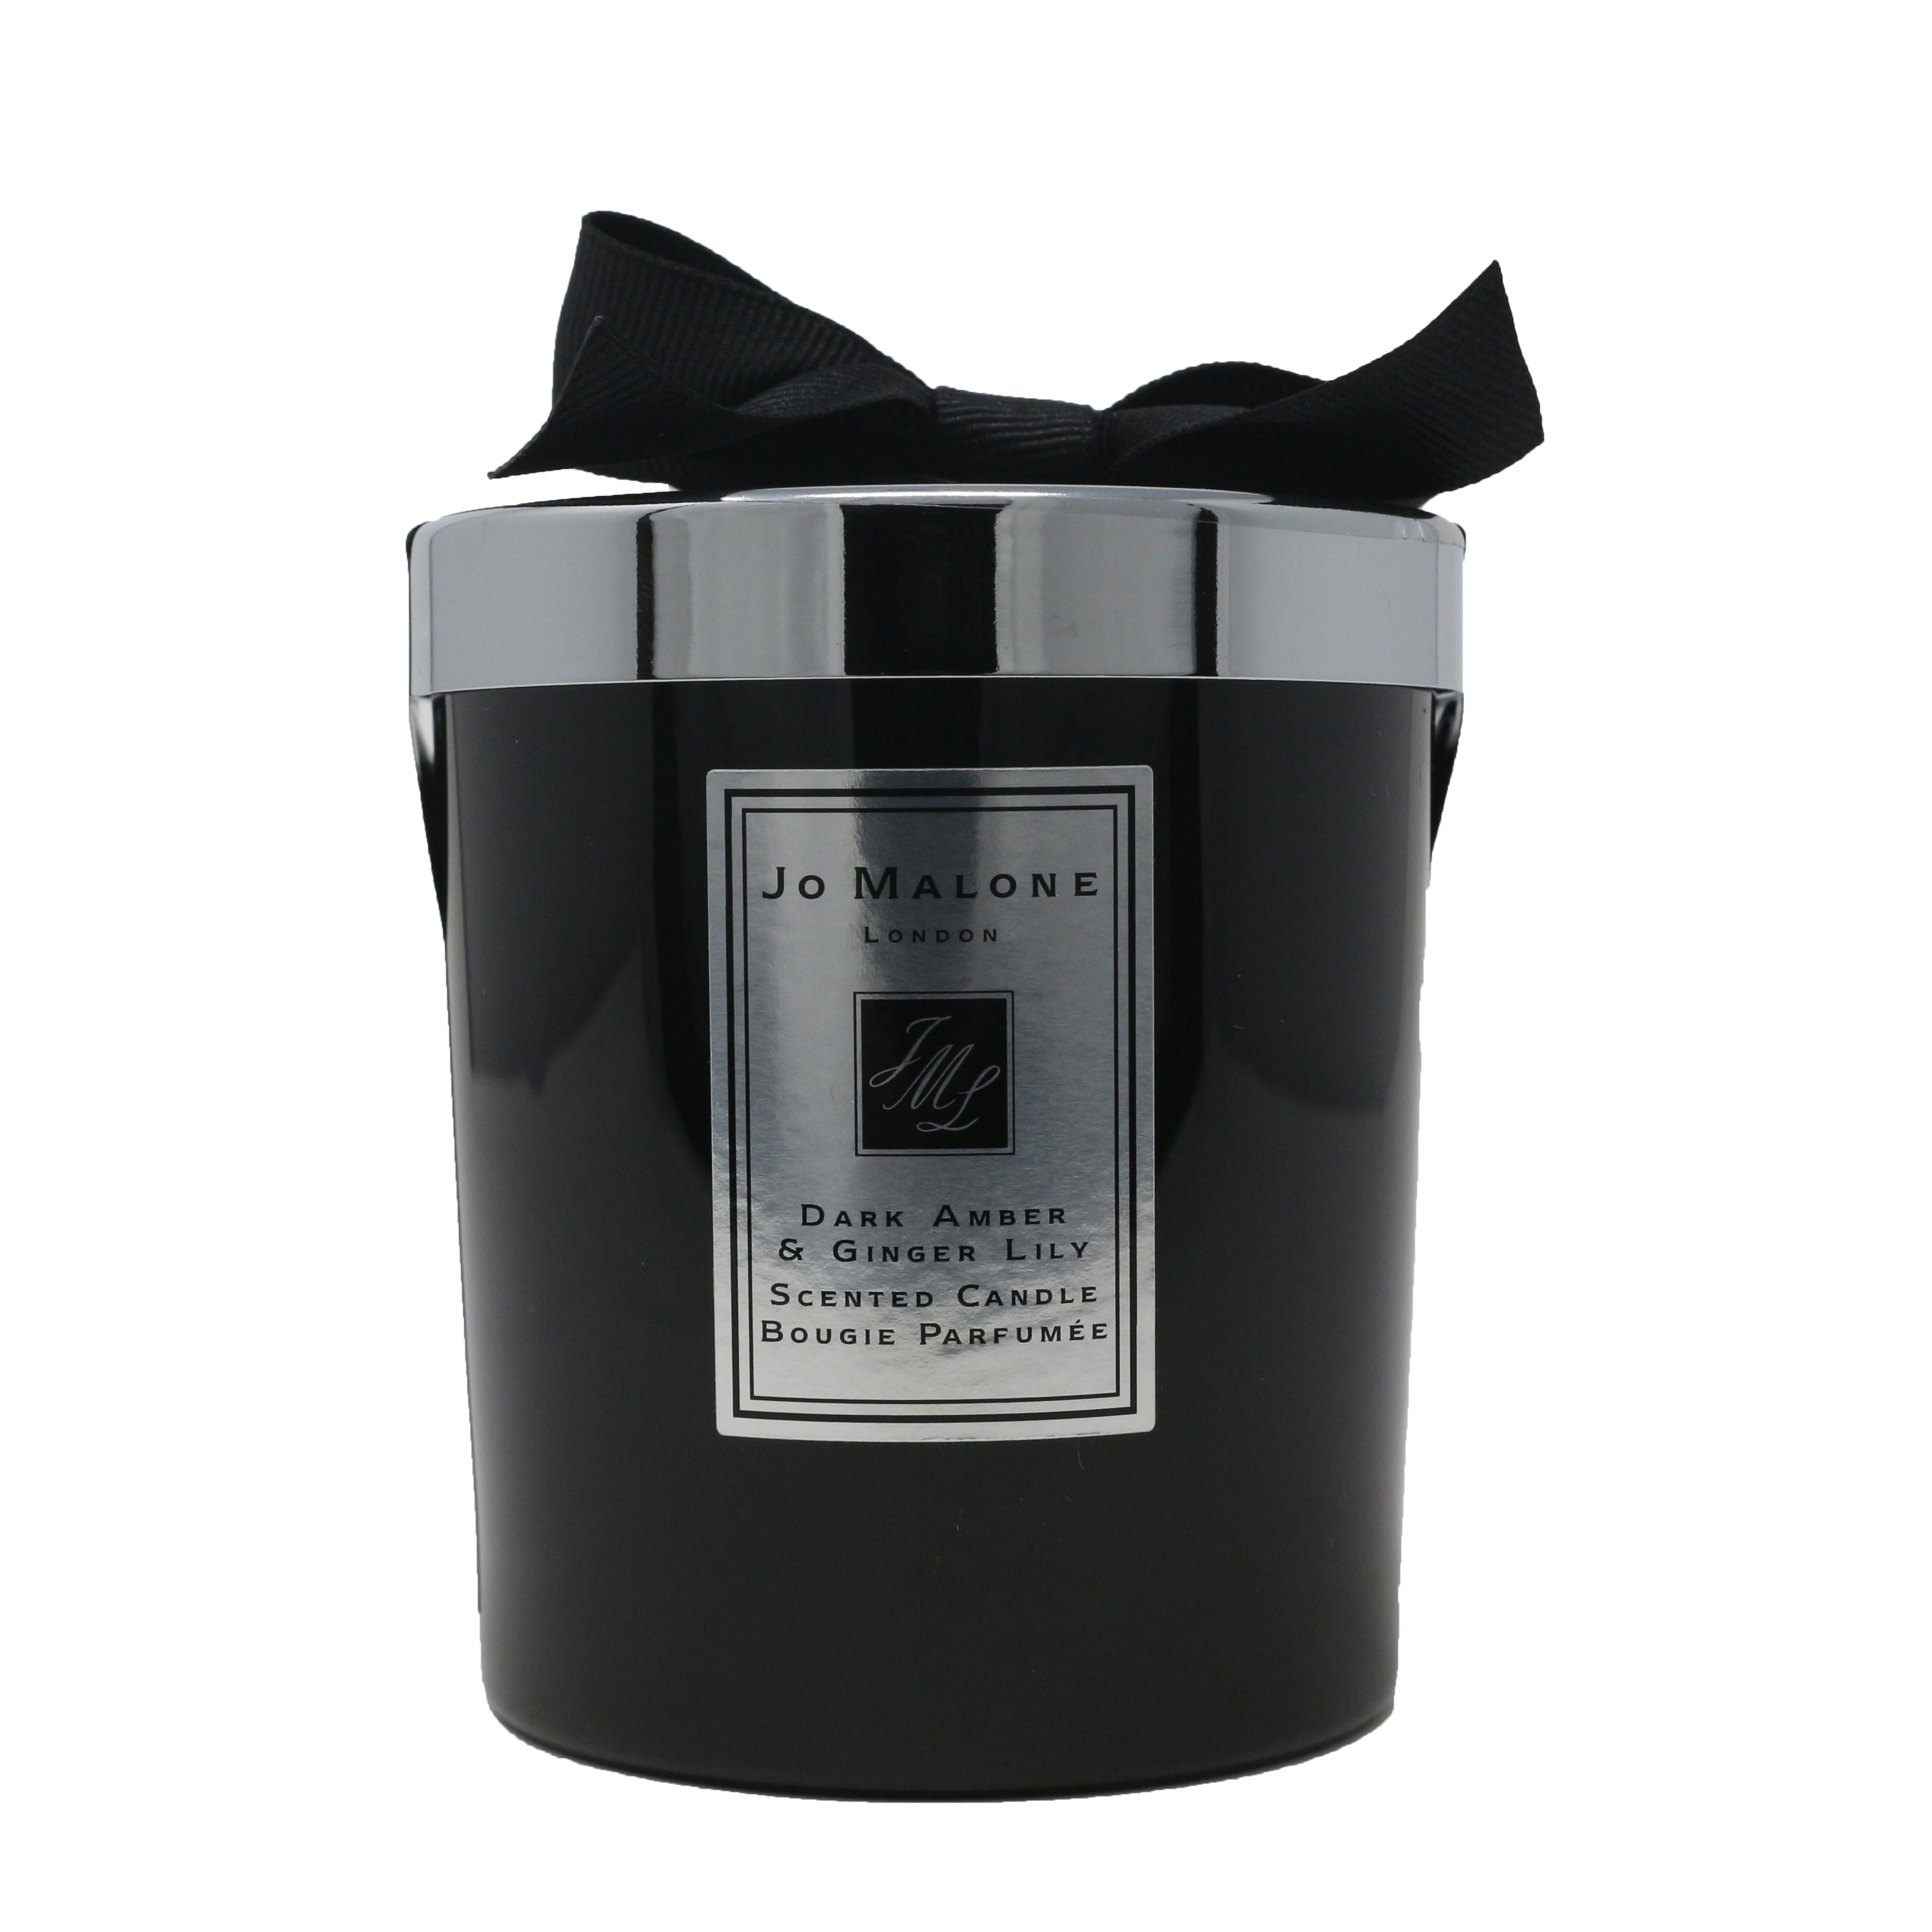 Jo Malone Dark Amber & Ginger Lily Scented Candle 7oz/200g New In Box ...